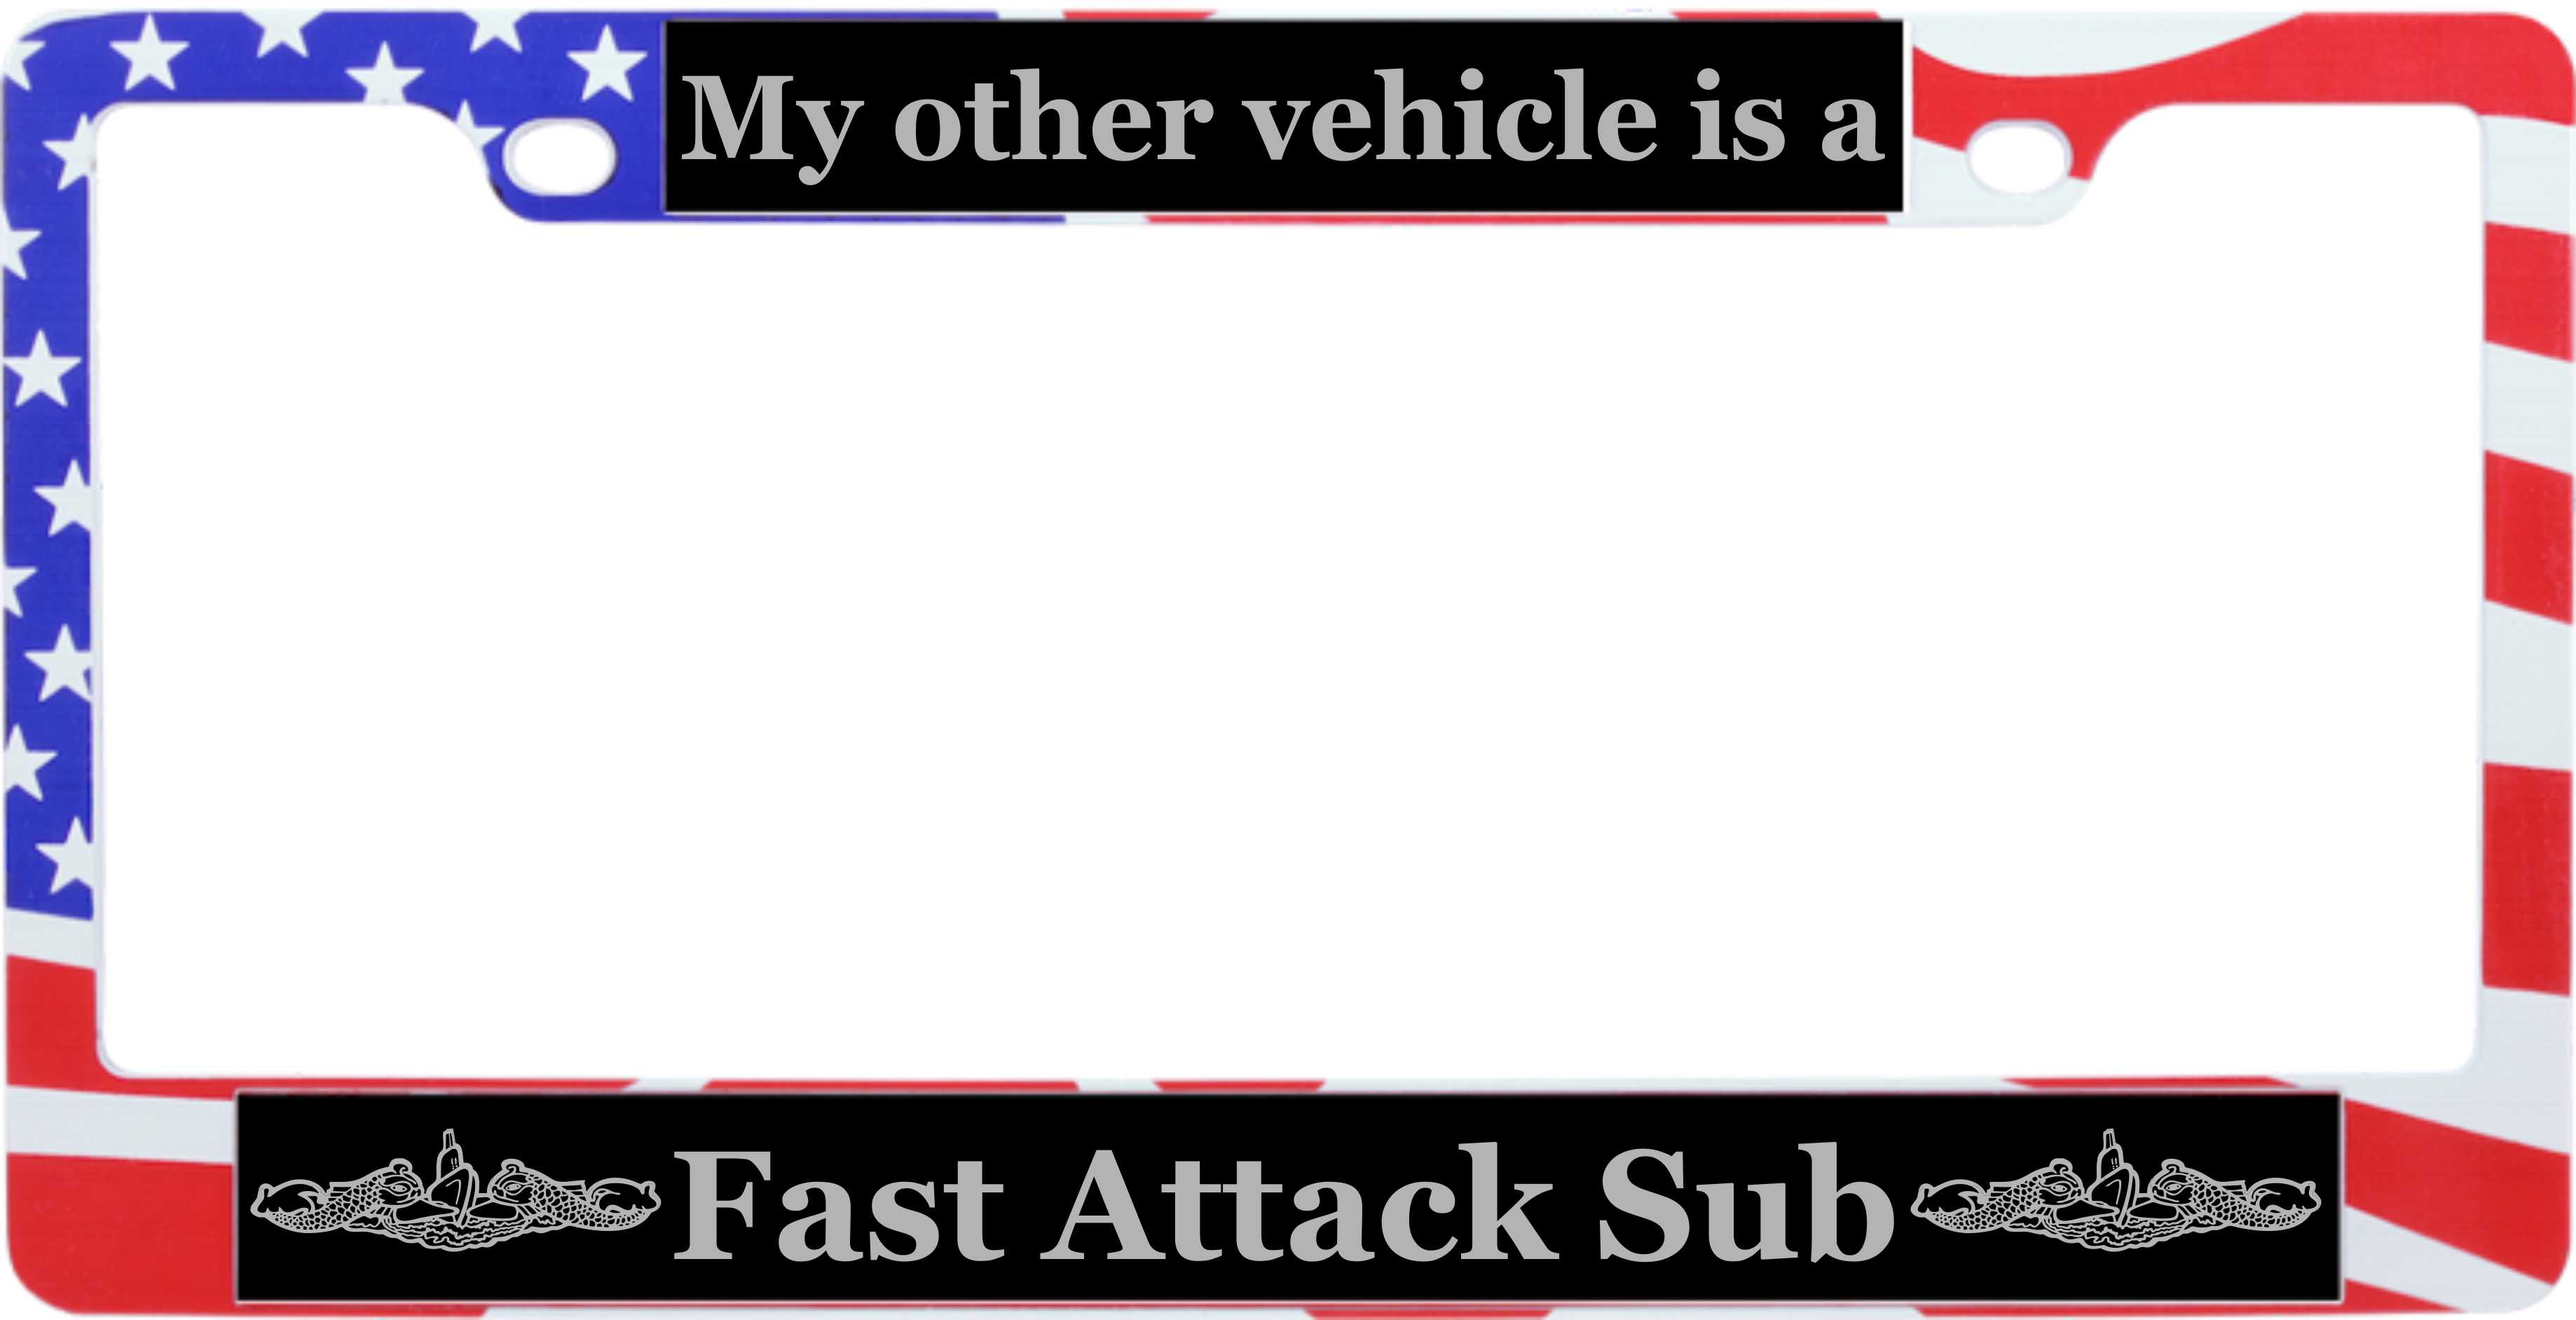 Fast_Attack_Sub Car license plate frame